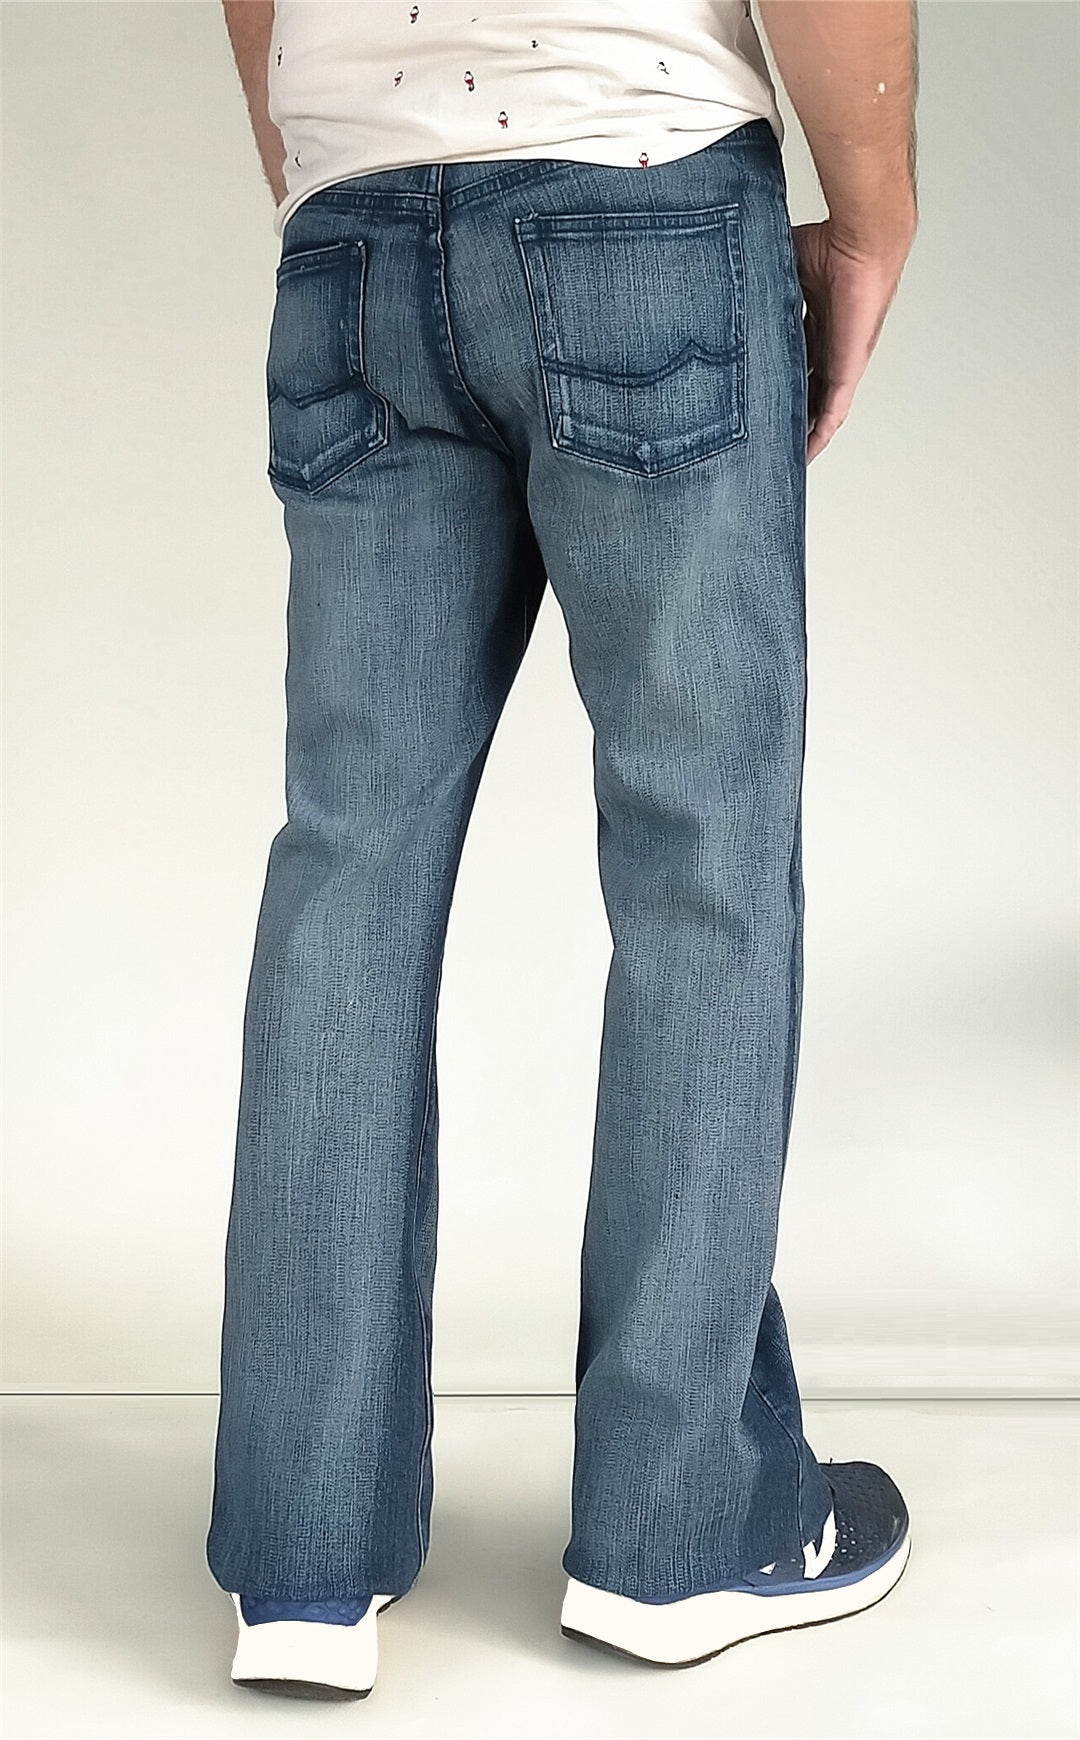 Men JEANIUS JEANS Joseph Relaxed Bootcut stretch Jeans in blue - Mid rise